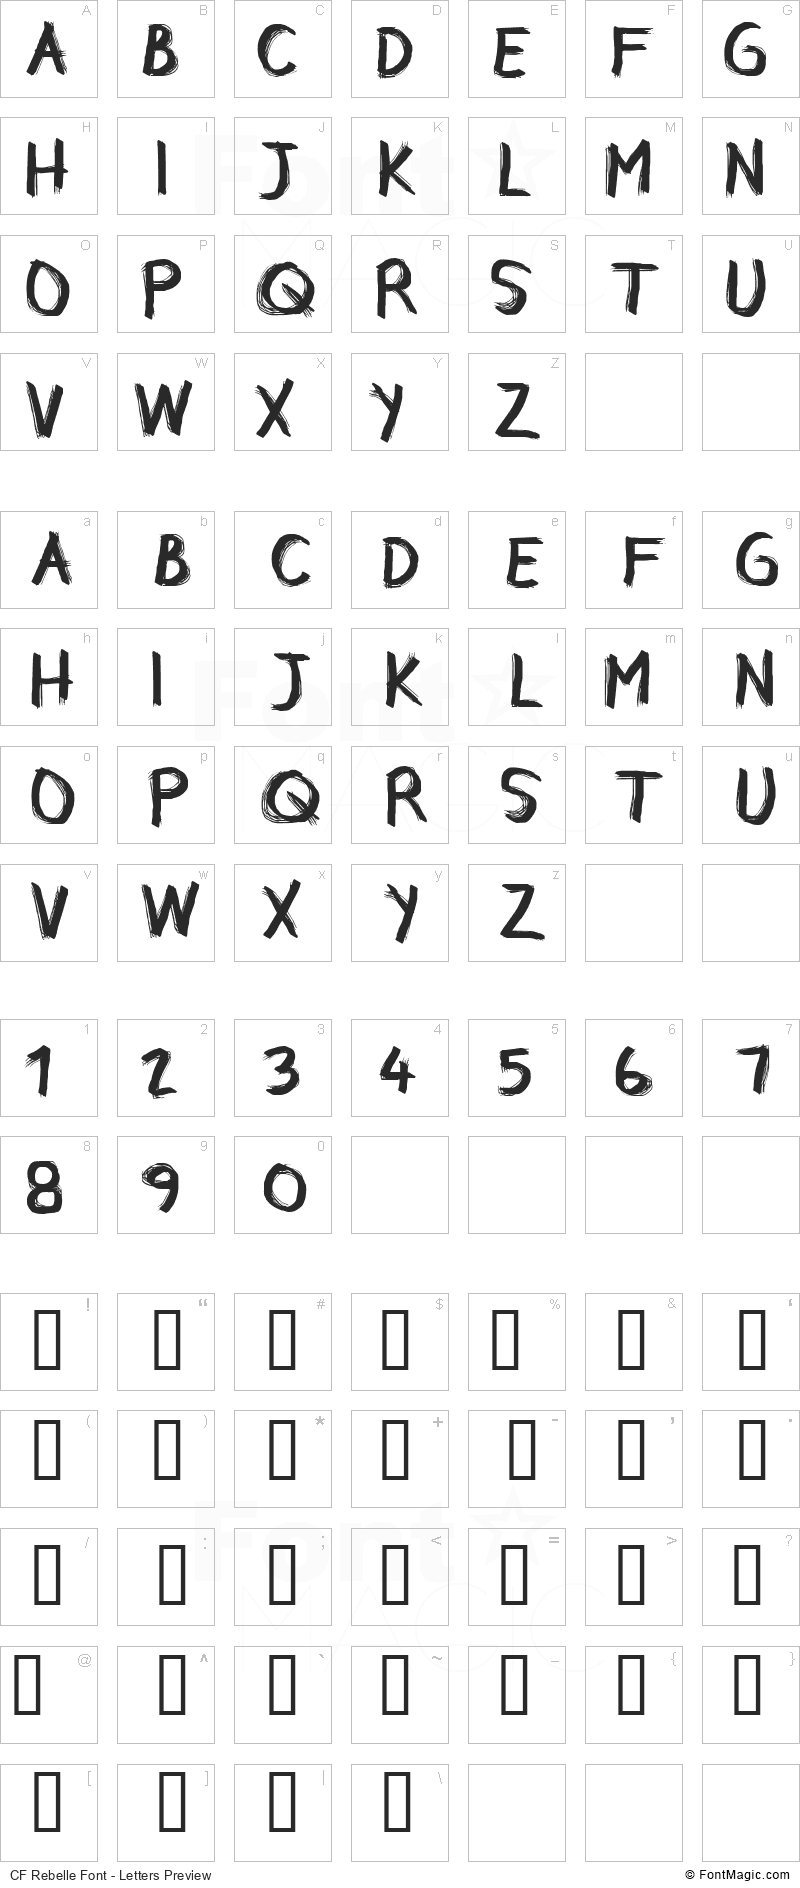 CF Rebelle Font - All Latters Preview Chart